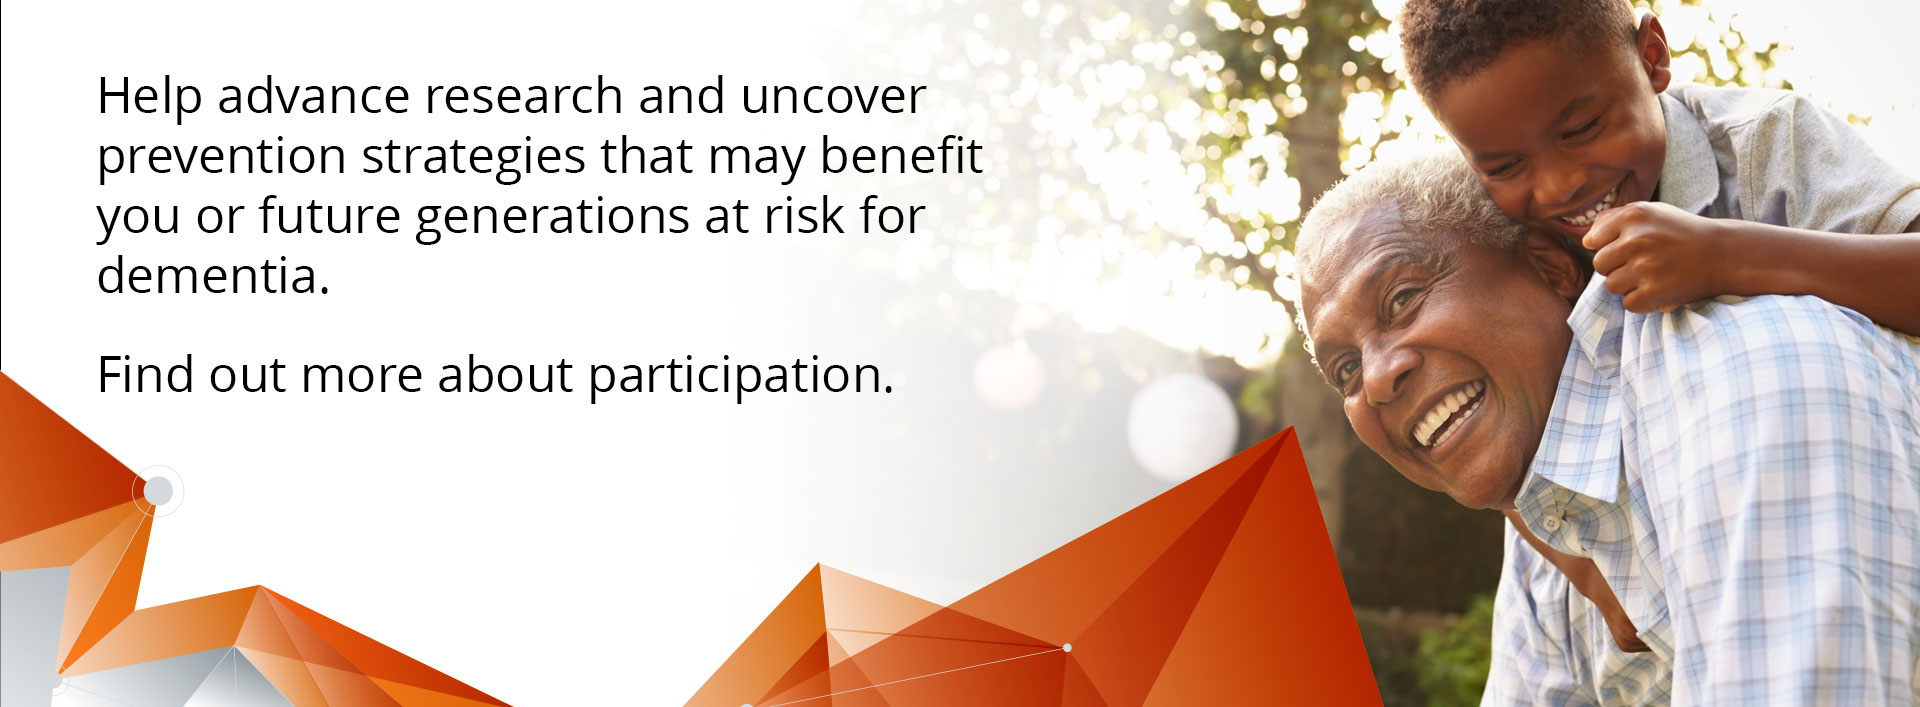 Help advance research and uncover prevention strategies that may benefit you or future generations at risk for dementia. Find out more about participation.